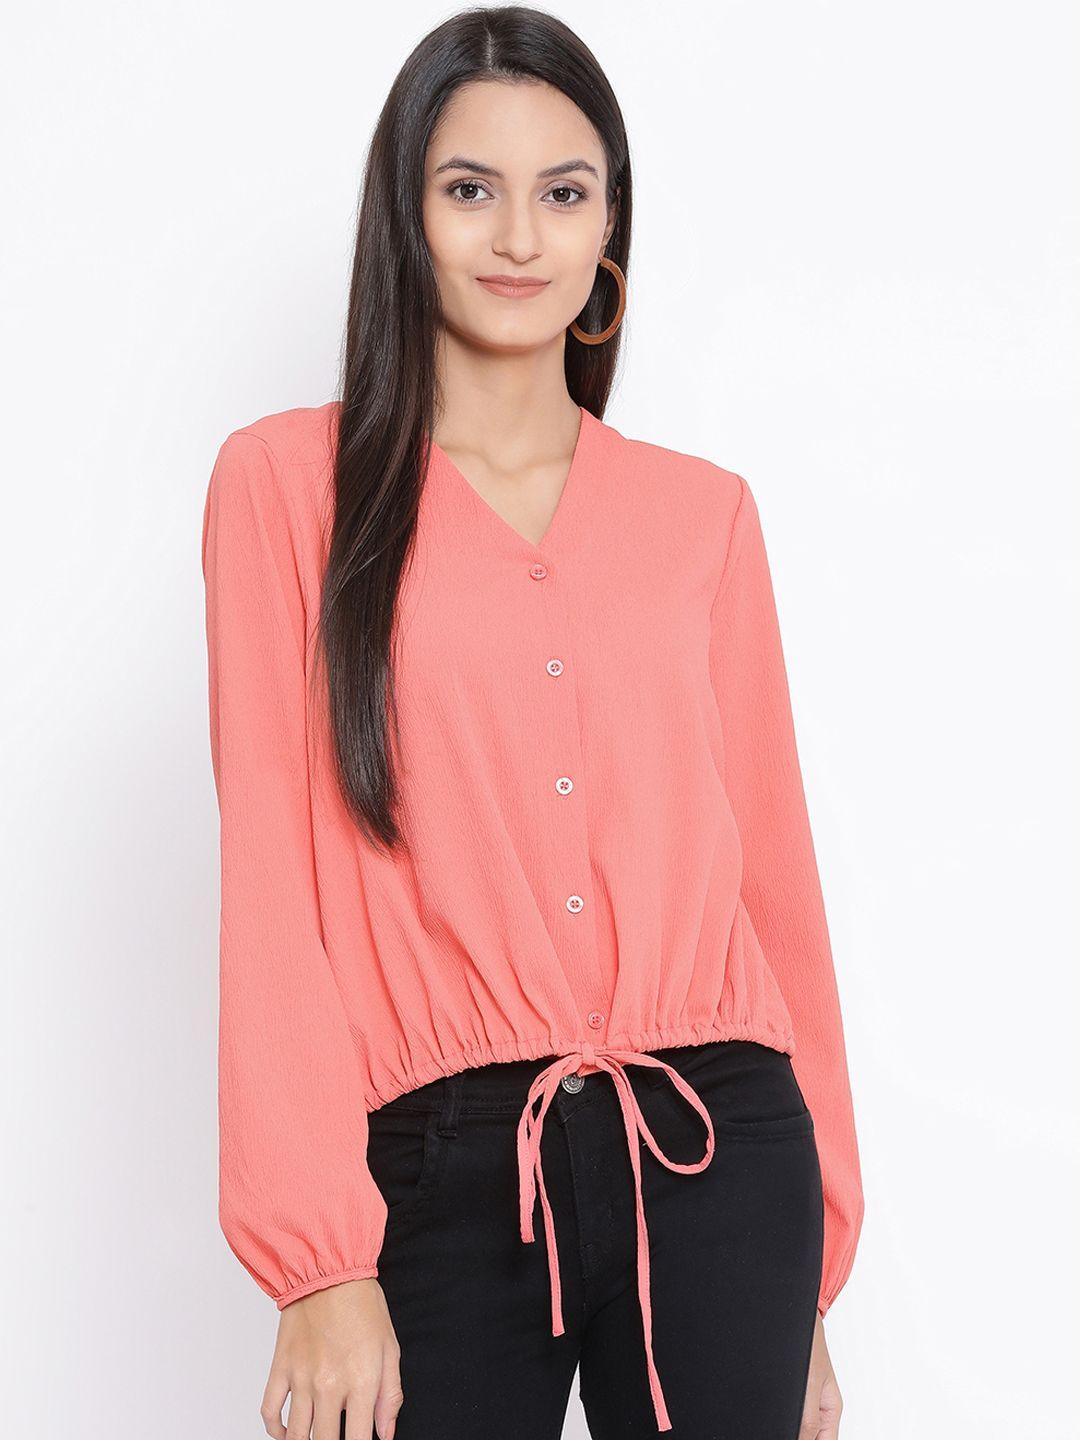 oxolloxo women coral pink solid blouson top